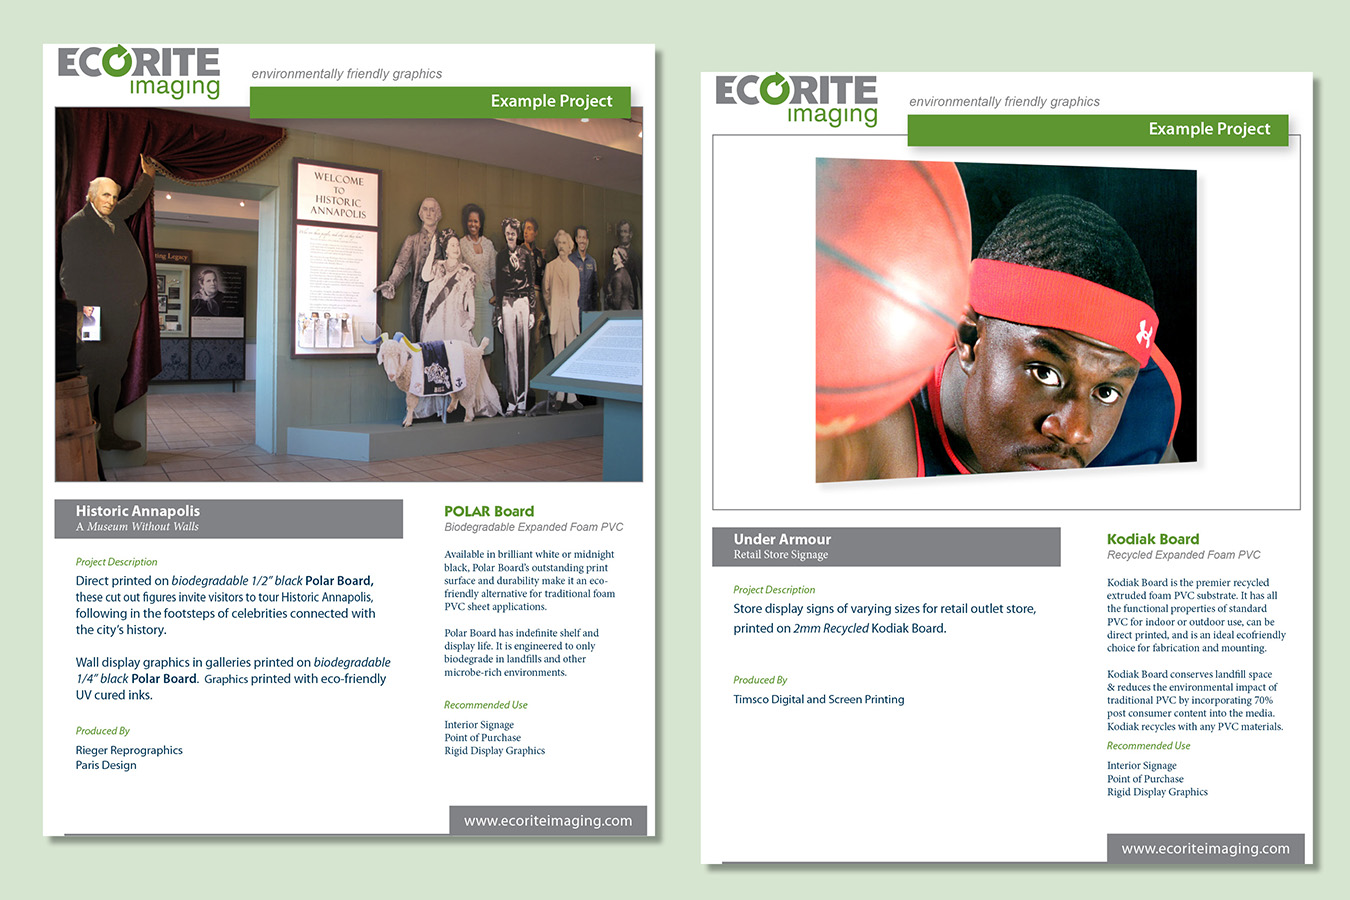 ecorite 15 : Case studies of Ecorite Imaging printed products in use